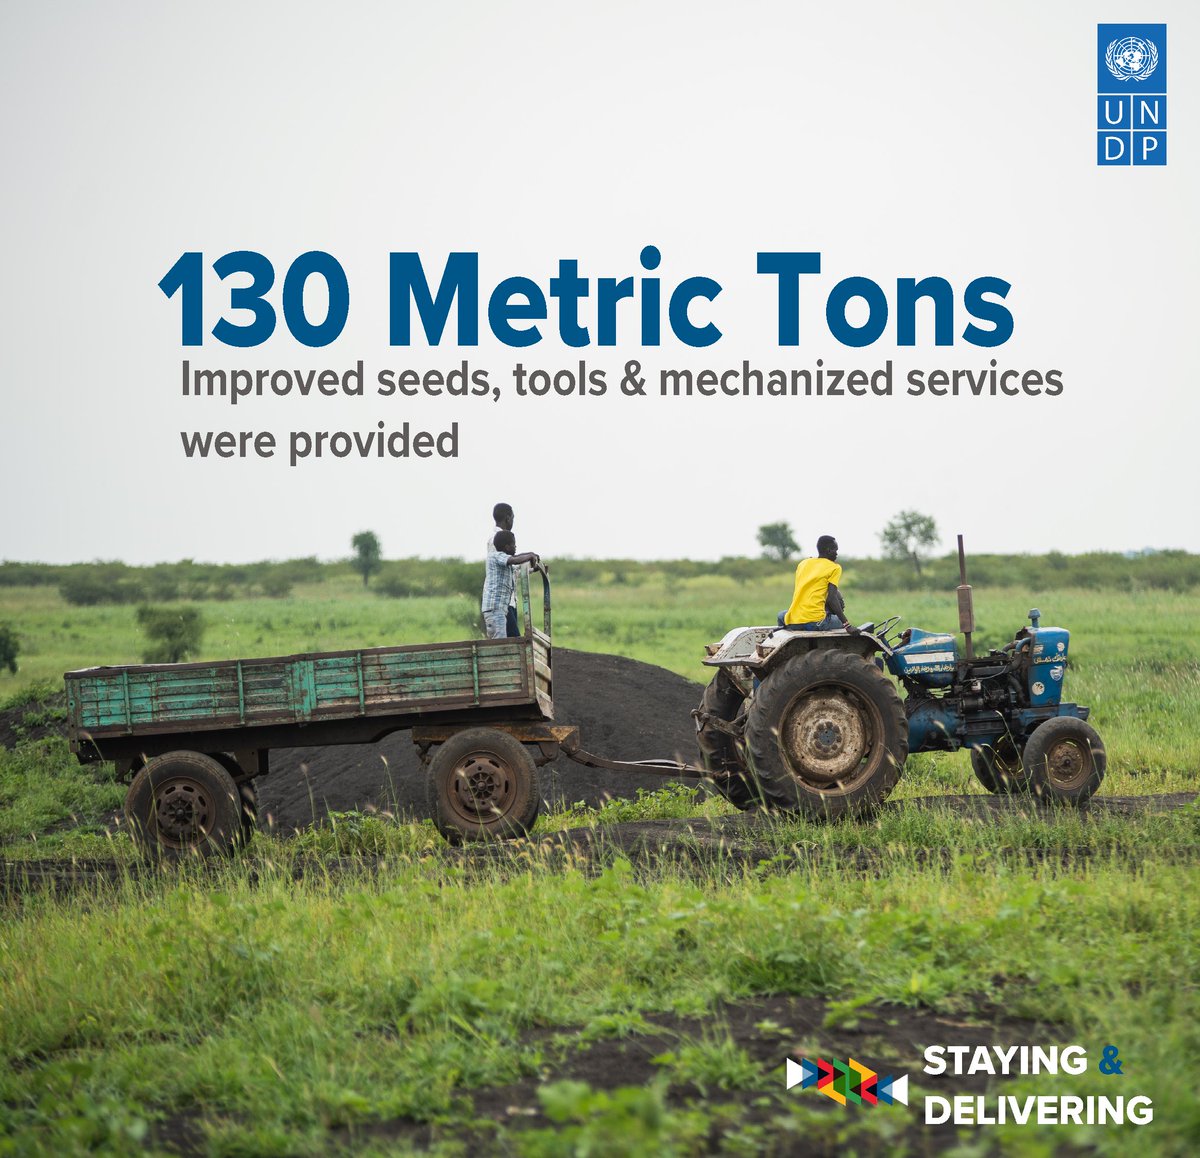 In the Two Areas, North Darfur, and East Sudan, @UNDP has supported the food security of over 26,000 internally displaced people & host community members through provision of agricultural inputs & access to agricultural mechanization 🌾🚜 #StayingAndDelivering